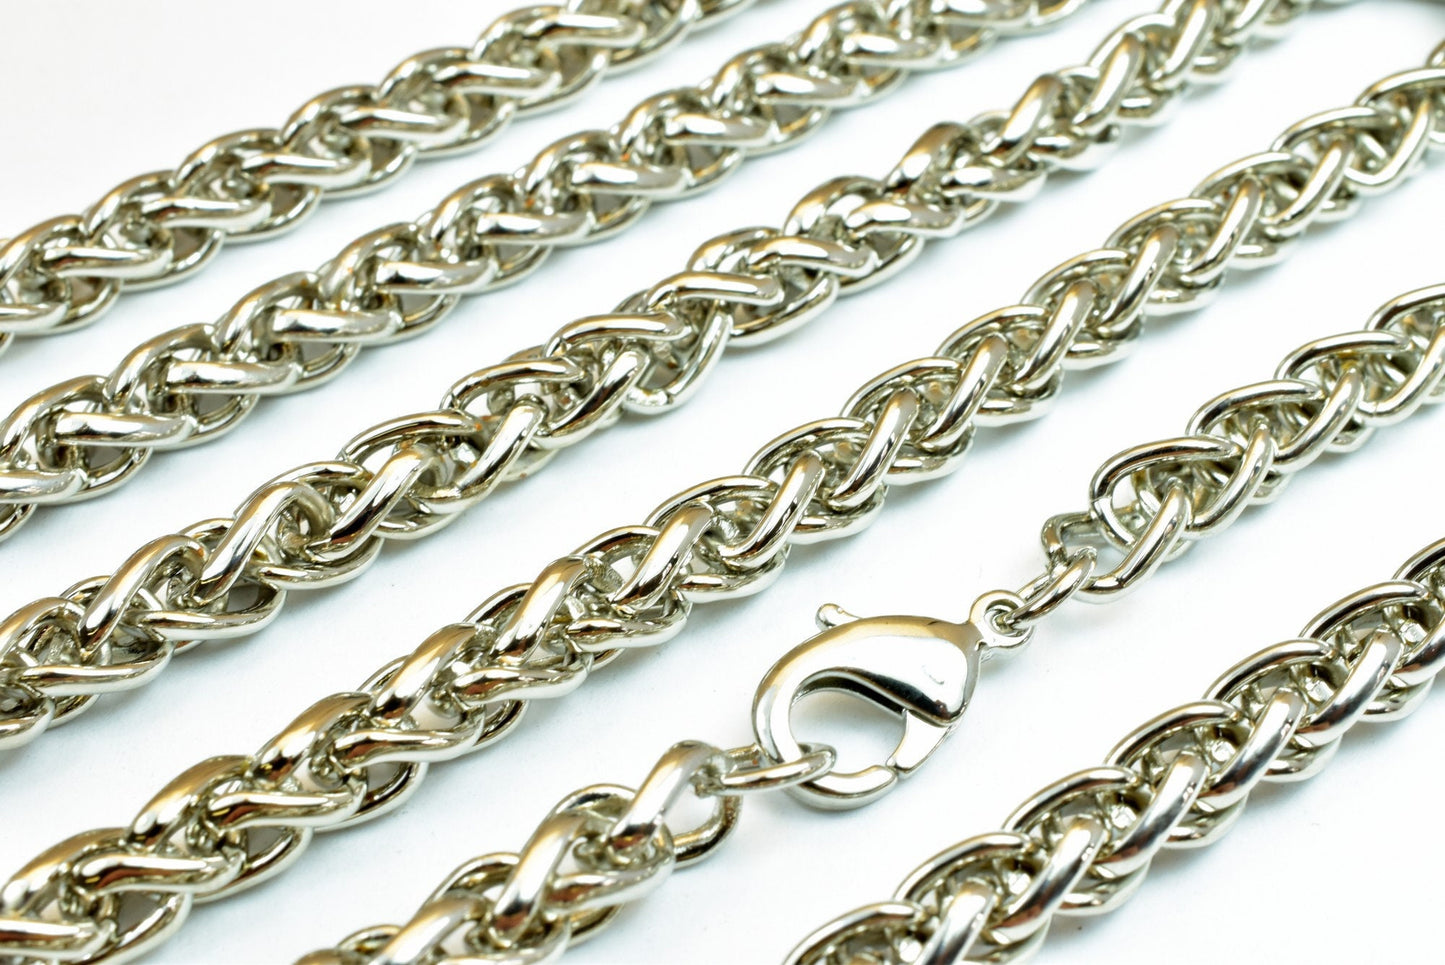 Spiga or Wheat Rhodium Filled White Gold Filled Chain 22" Inch CS5 For Jewelry Making